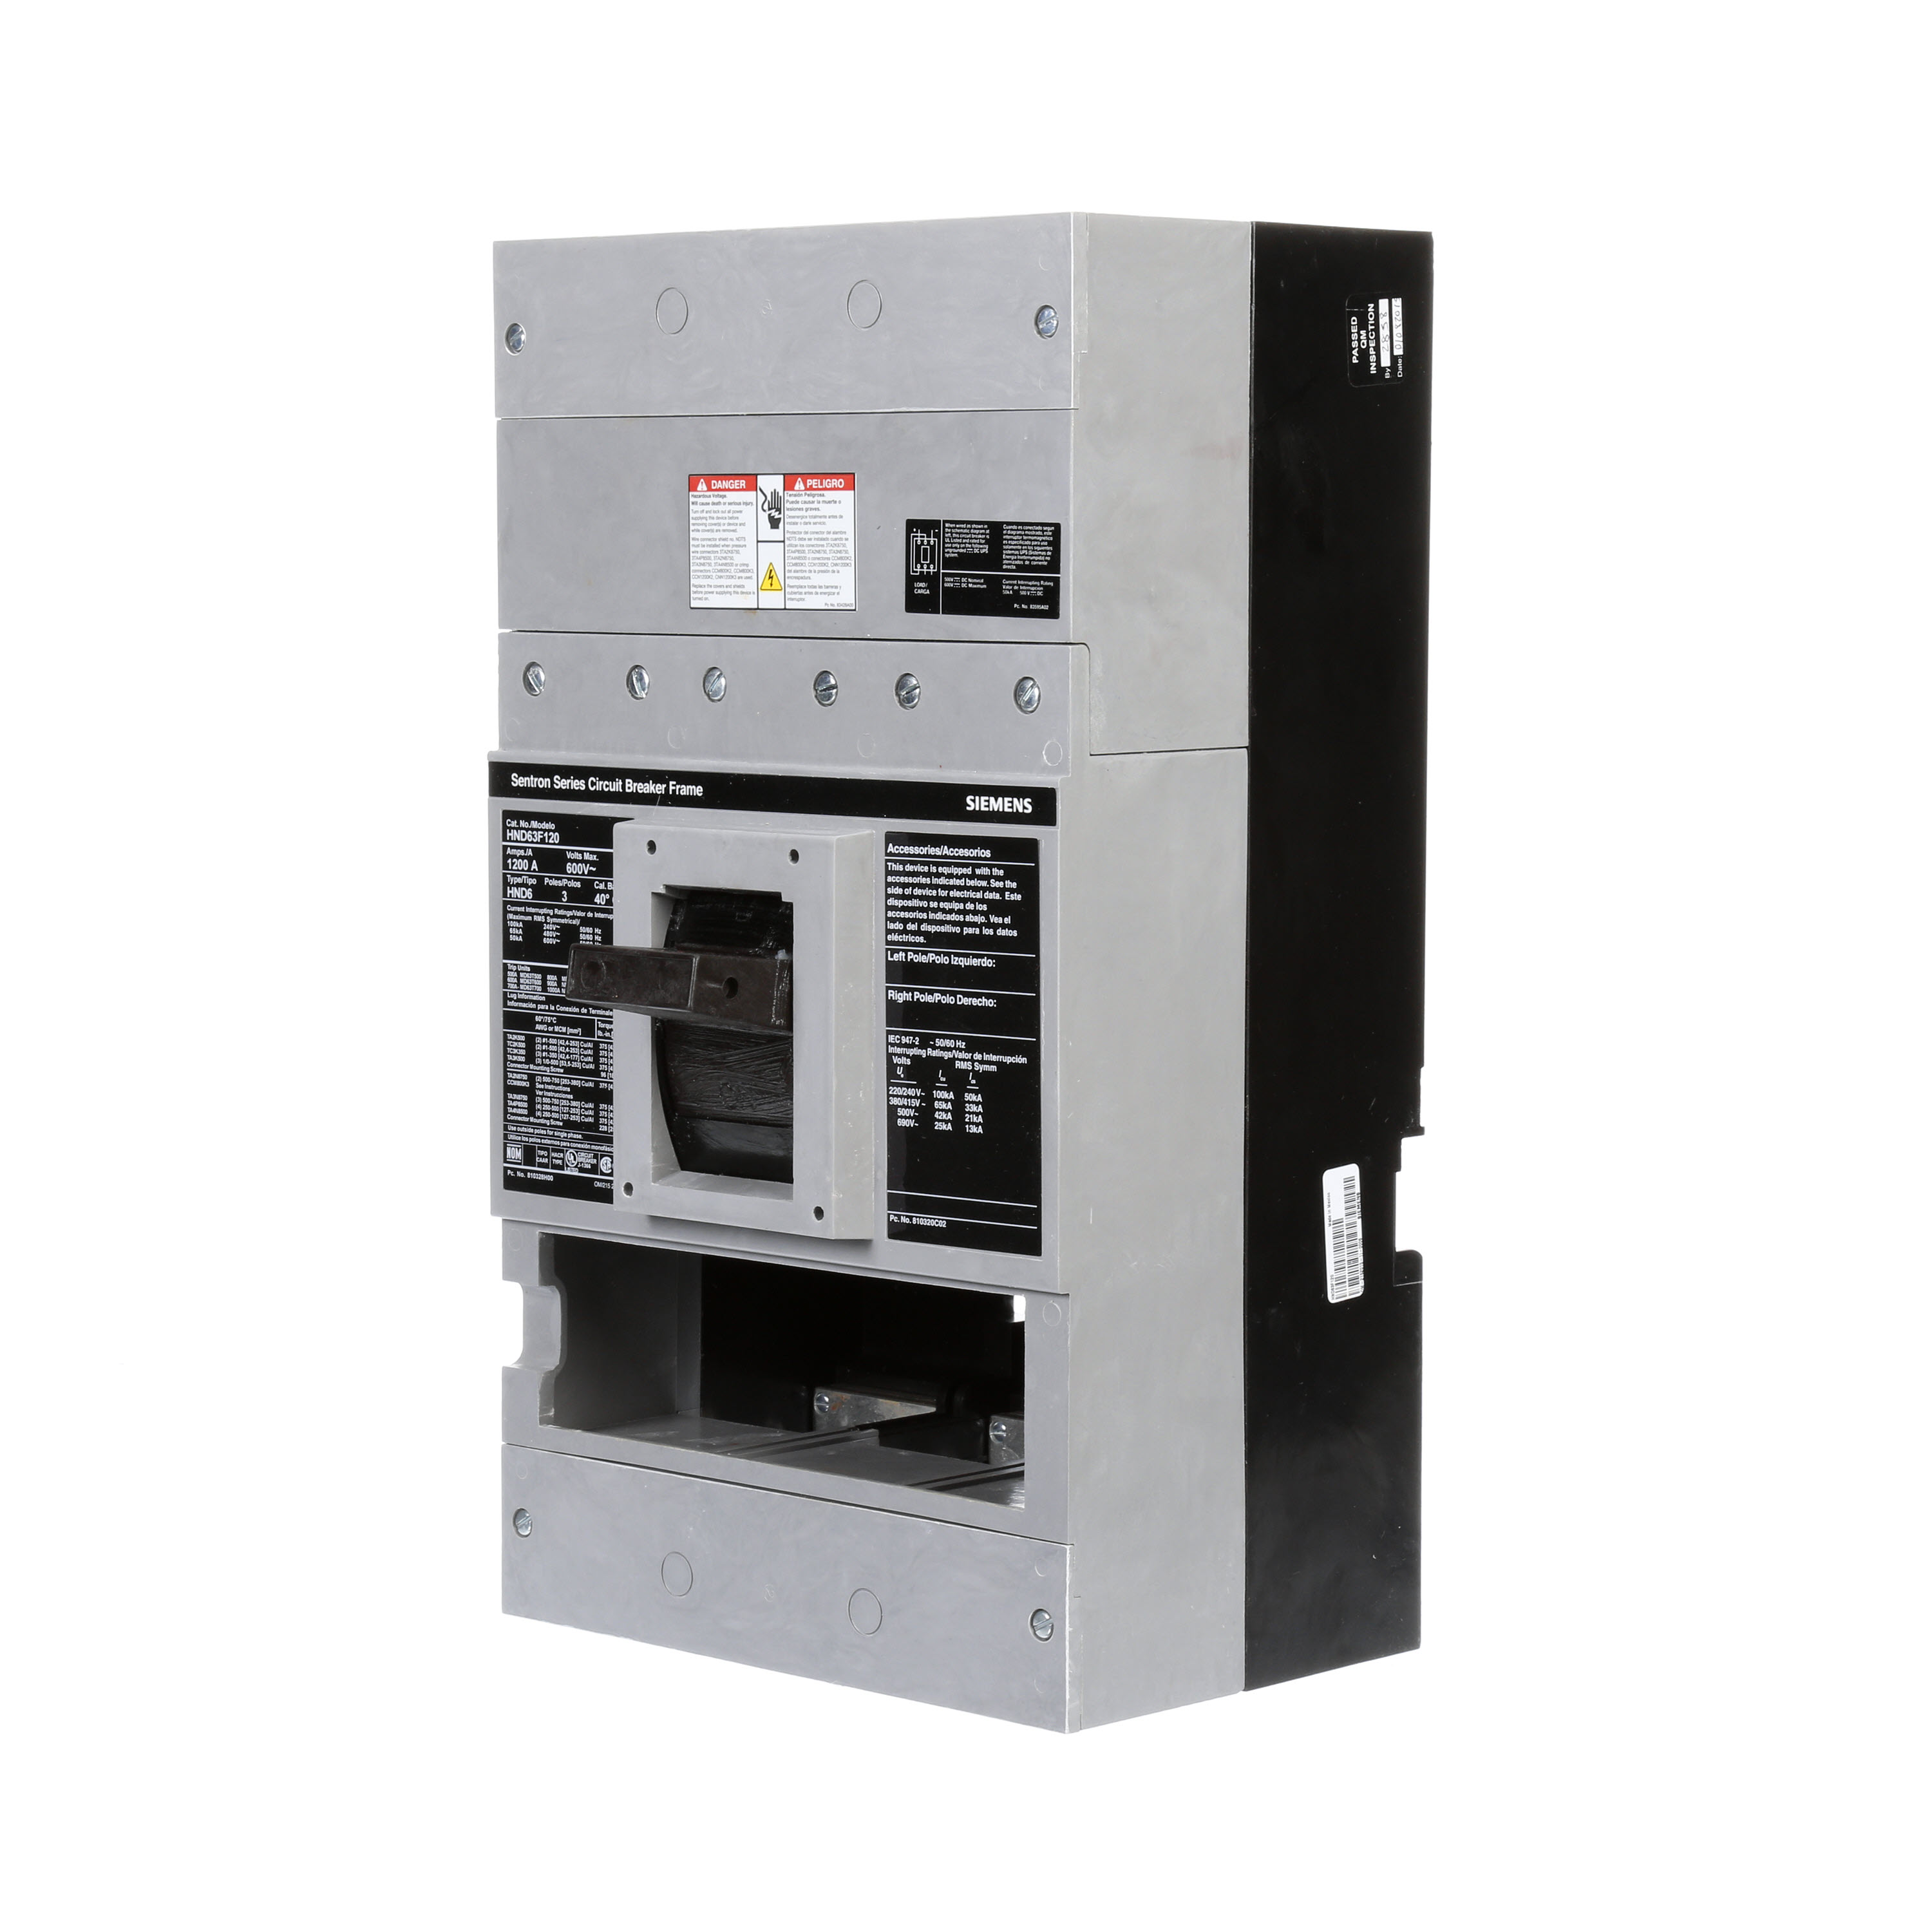 SIEMENS LOW VOLTAGE SENTRON MOLDED CASE CIRCUIT BREAKER. 1200A ND FRAME FOR HIGH BREAKING CAPACITY 3-POLE 600V BREAKERS.